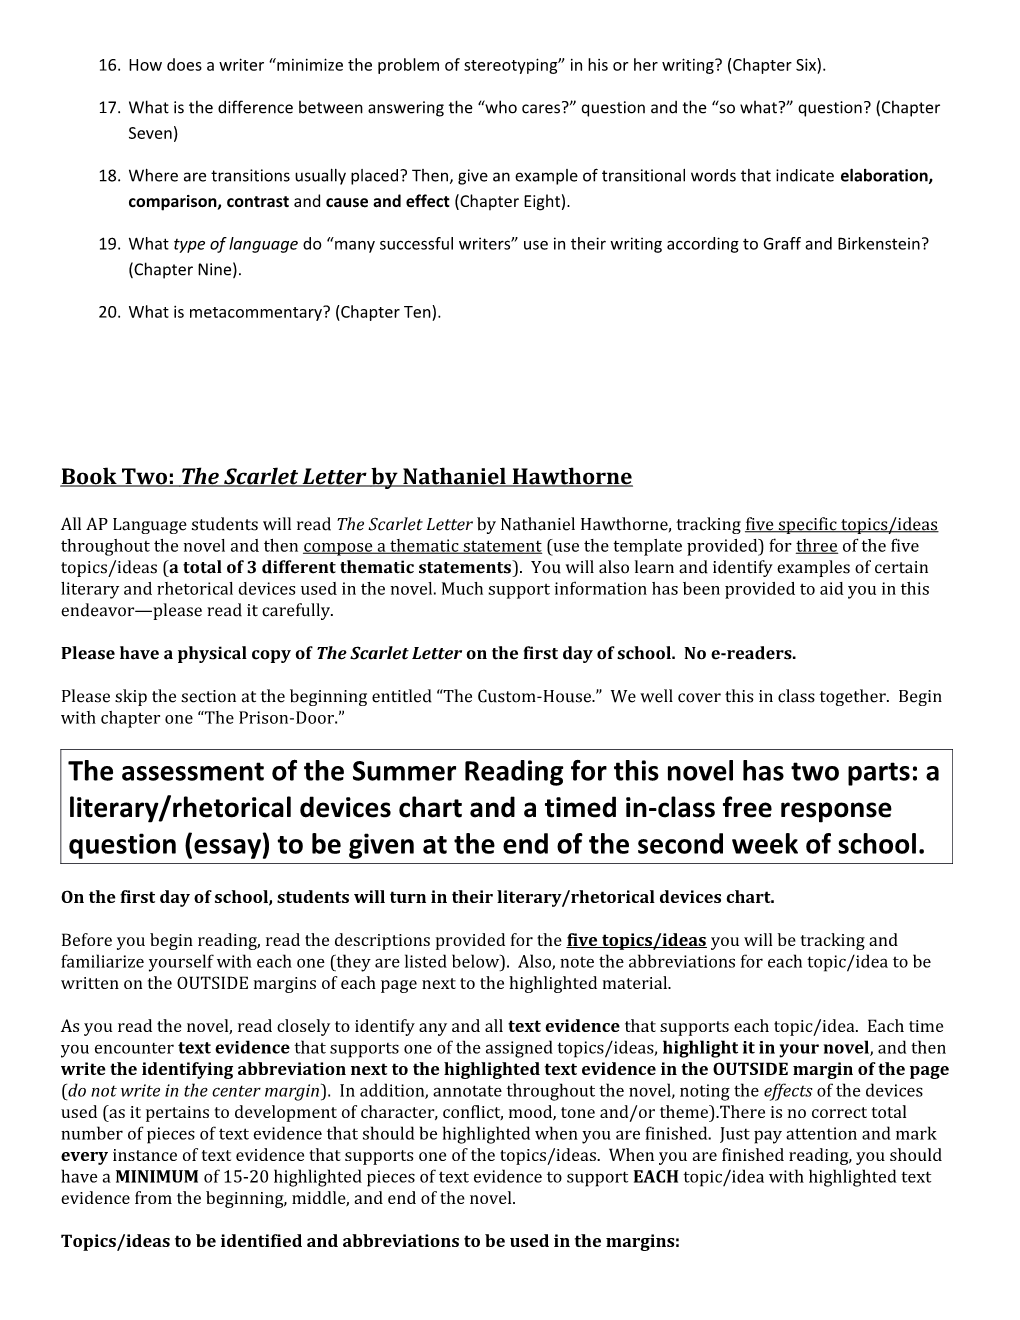 AP Language and Composition SUMMER READING ASSIGNMENT (2017-2018)